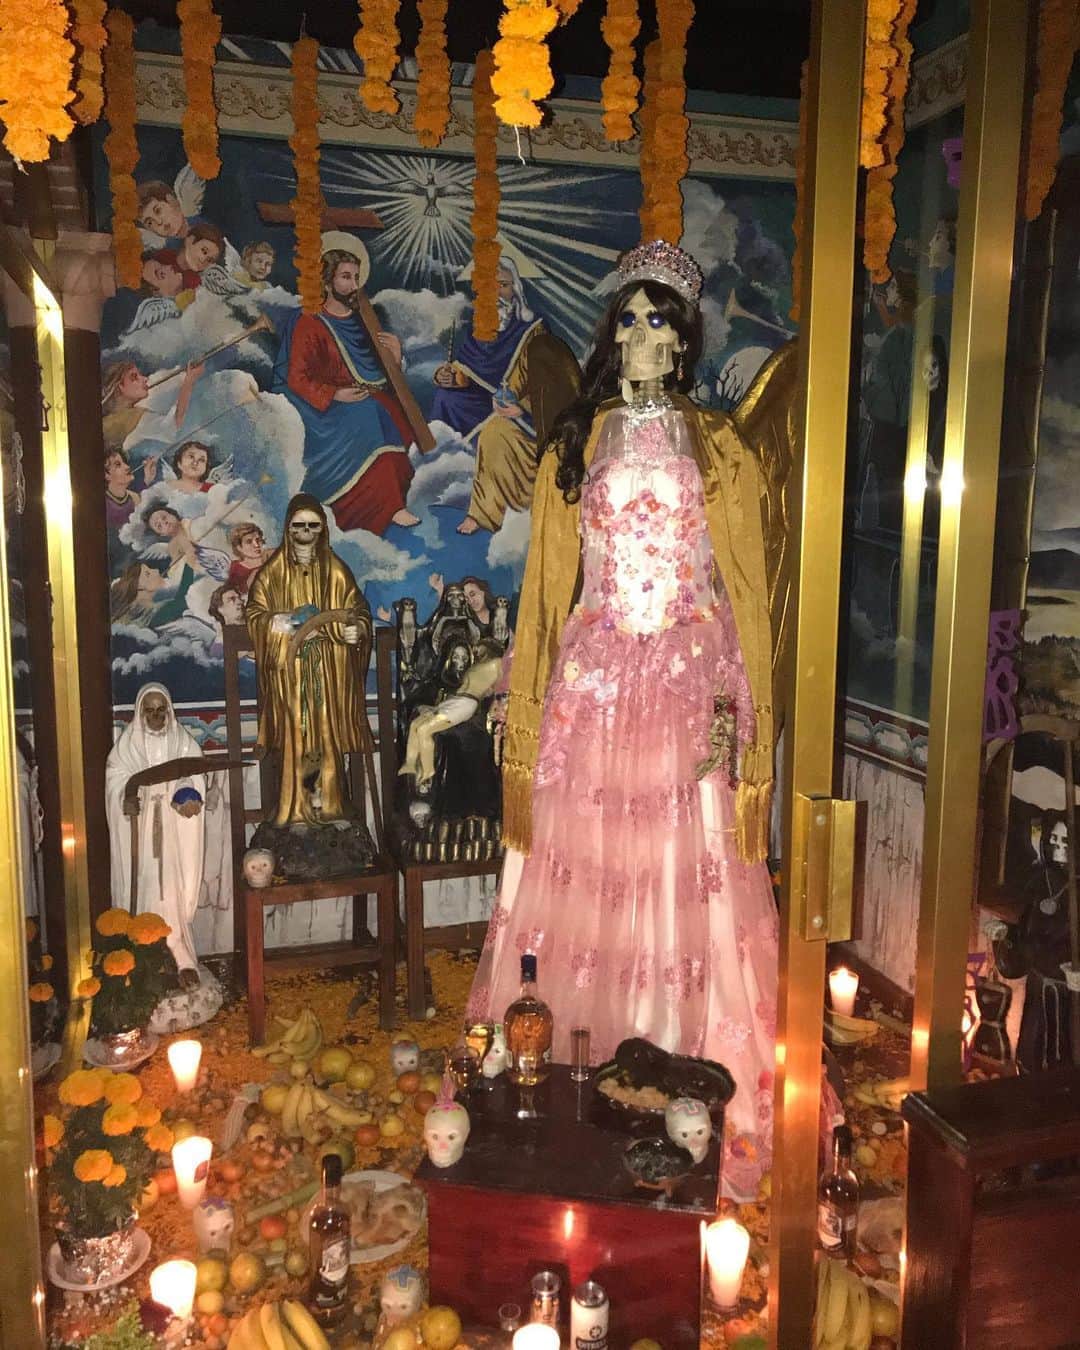 トームさんのインスタグラム写真 - (トームInstagram)「Wild place to end the night on #DiaDeLosMuertos  . Templo a La Santa Muerte Santa Ana Chapitiro  .  Of bronze, copper, wood, feathers, clay, paper, quarry or plaster; sculpted or painted in watercolor, oil, or pastel; The holy death, the white girl or the saint to dry, is exhibited by hundreds in patios and walls of the sanctuary installed in the old town of Santa Ana Chapitiro, on the shore of Lake Pátzcuaro  With 25 years of life, it has become an obligatory reference for the worshipers of the necrophilous cult of growing affiliation, stimulated by a scenario of violence that does not stop, and that in the last 13 years has added violence to almost 300 thousand skulls to the pantheons. . A singular and select shrine that stands out among more than 400 points of devotion in states such as Hidalgo, Zacatecas, Oaxaca, Tamaulipas or Mexico City, where this faith is spread.  The person in charge of the veneration center agrees to talk, but categorically cuts it off from the start: “She is an angel of the Lord who has nothing to do with the evils that we see every day. She does not come for anyone on her own account, but God sends her ", and ensures that the tabernacle is visited, among others, by" soldiers who come to sniff, but with respect for the girl ", to ask for someone that perhaps he could have come to visit. “We do not report anyone. We only see people who bring candles and offerings, who pray, cry or celebrate, but we do not ask about anyone's origin or destination, ”he says.  The police from the municipalities of the Pátzcuaro Lake Basin also arrive from time to time, "but they only go down to leave a present for the girl, make quick prayers and leave." .  The cult began 25 years ago, when a group of believers came looking for the stark image, and in the main church of the town they found a small stone sculpture. They began to worship her and soon the fervor grew and ended up bothering the priest and the most devout Catholics, so the priest accepted her transfer to a chapel in the town itself, until the main promoter, who "worked for many years in the government from Mexico City ”, he decided to make a replica of the image and open a small shrine.」11月3日 15時30分 - tomenyc